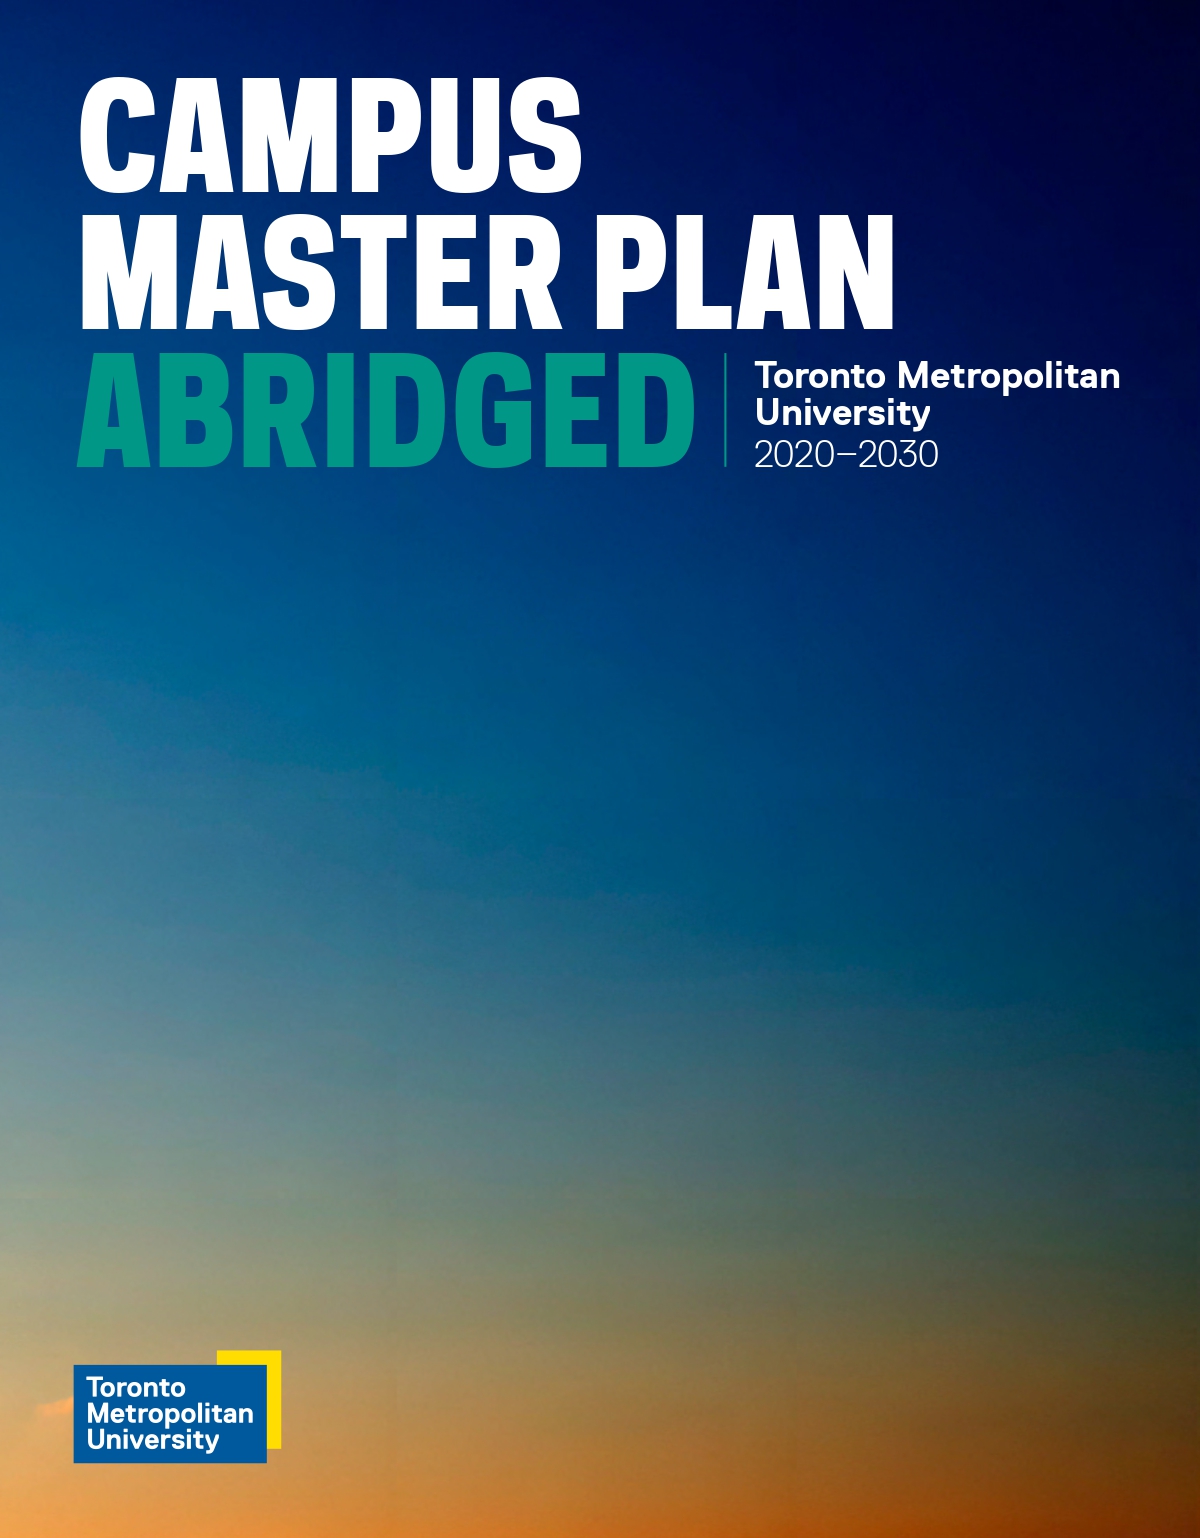 Cover of Campus Master Plan document 2020-2030